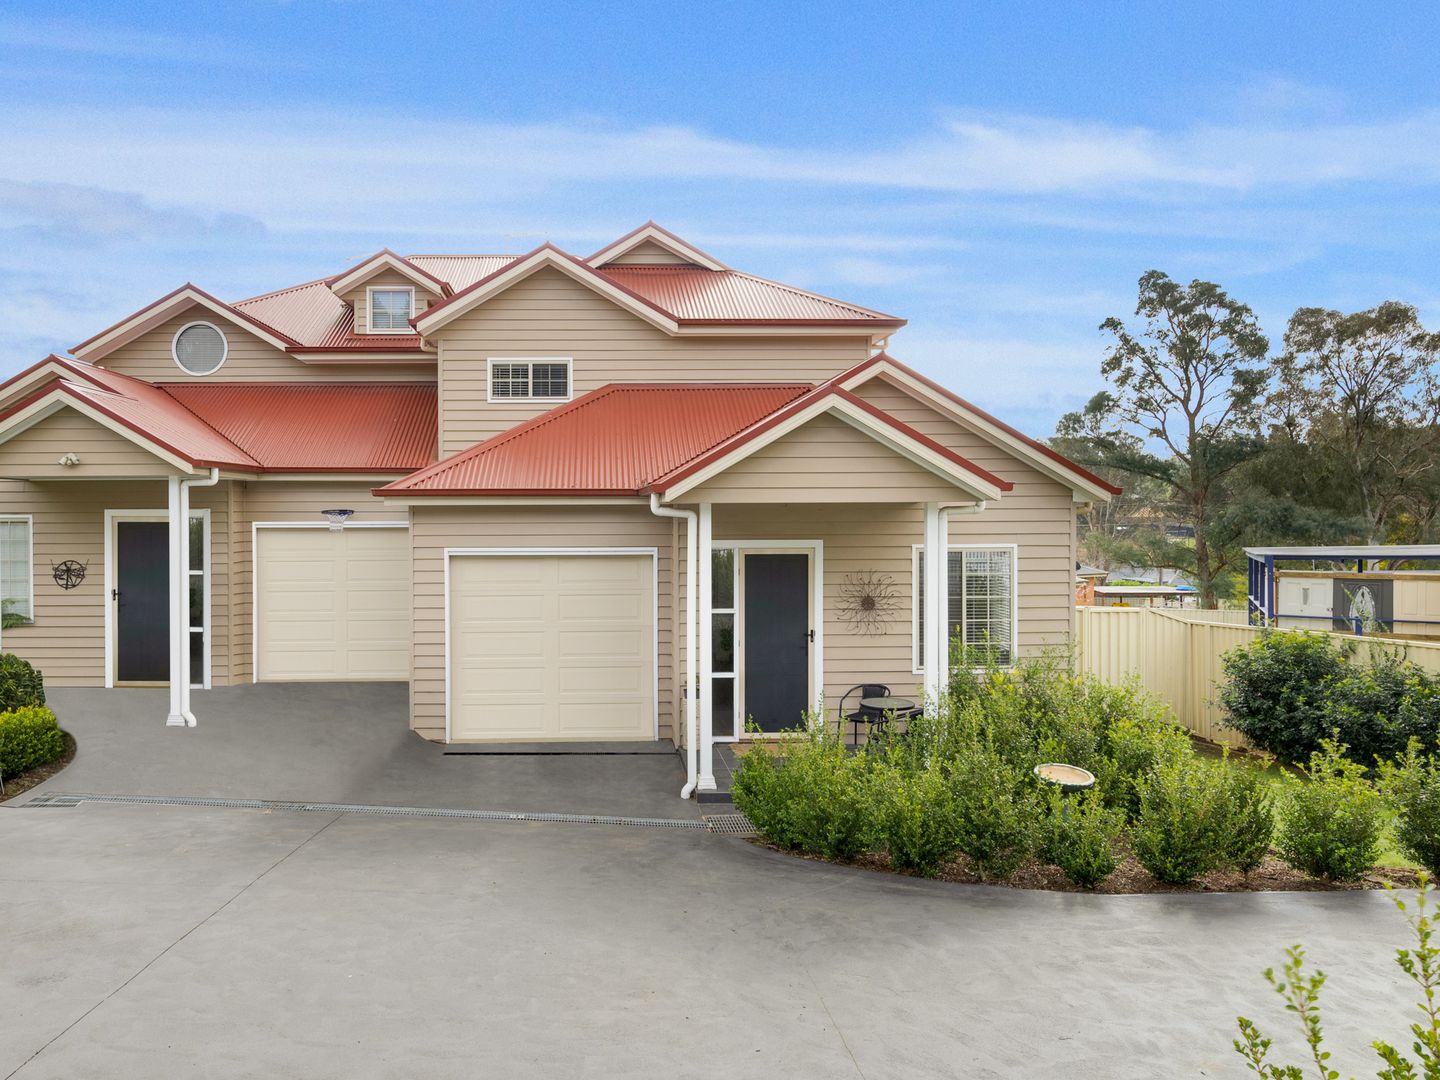 55 Remembrance Driveway, Tahmoor NSW 2573